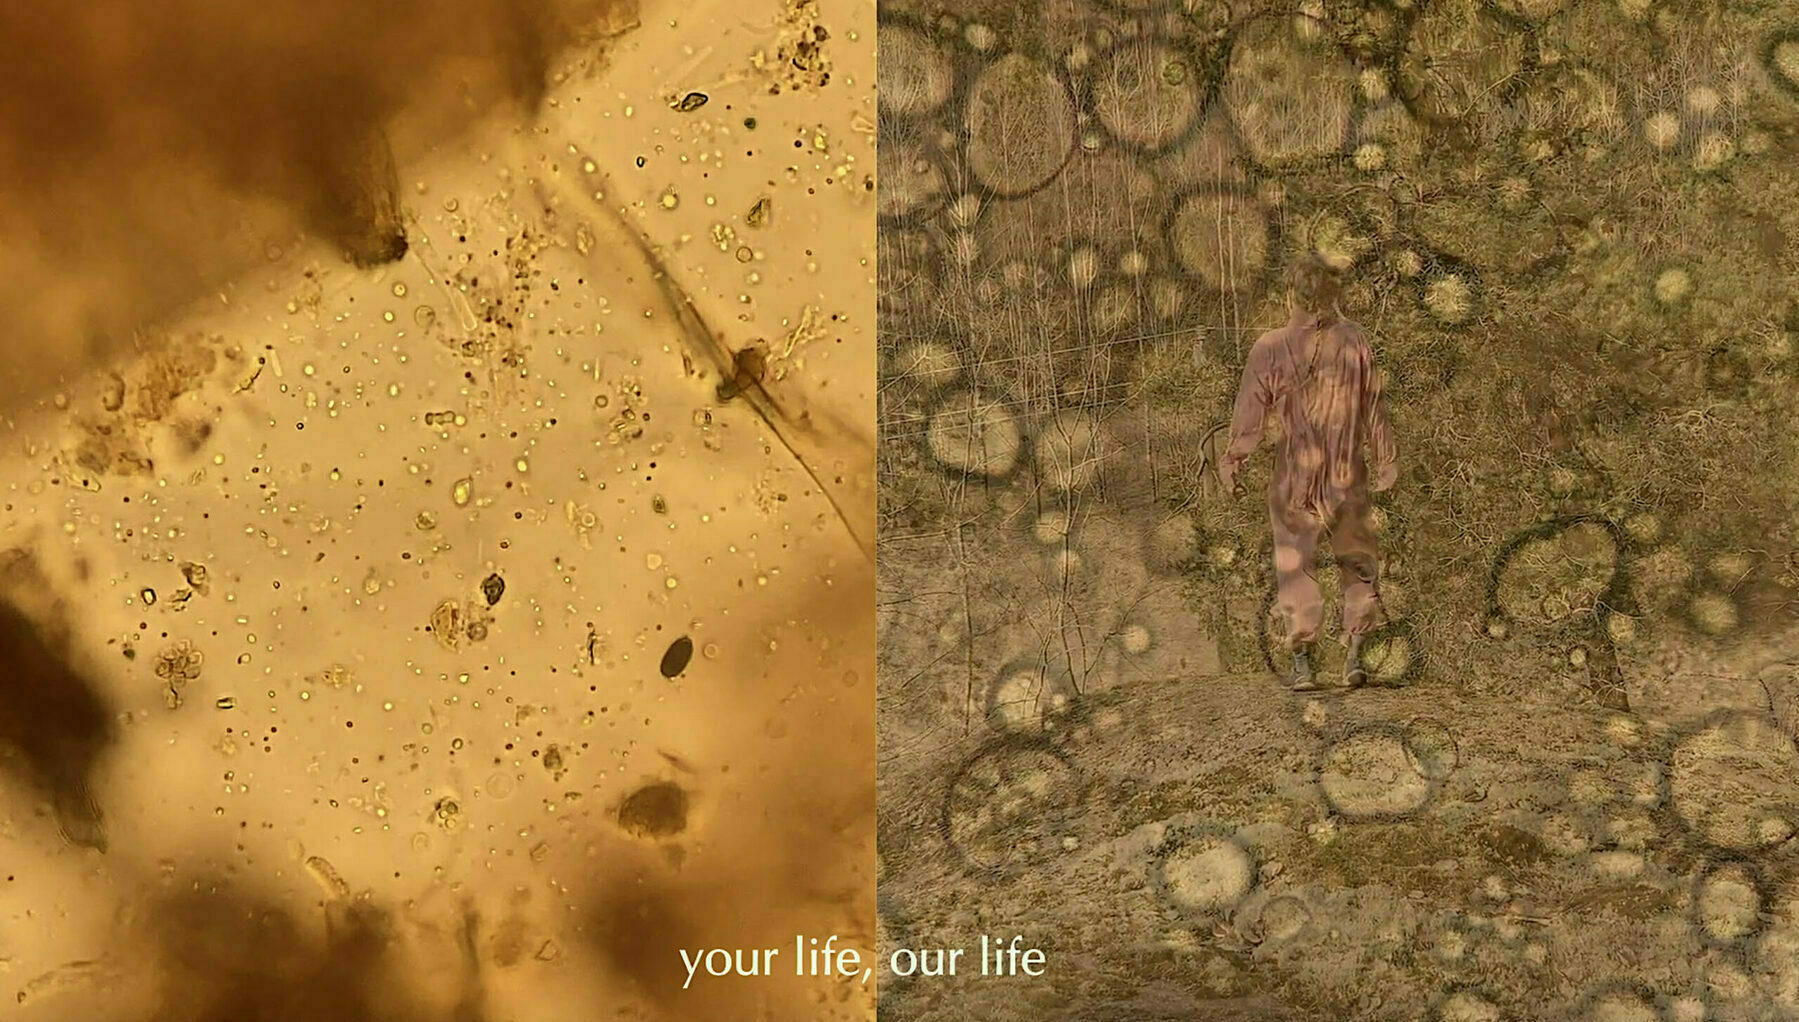 A screenshot from the videoperformance Microbimpro, which handles improvisation, gut feelings and microbes dancing. Two screenshots, left and right, lots of yellow and brown. Plenty of round entities. Author: Oona Leinovirtanen